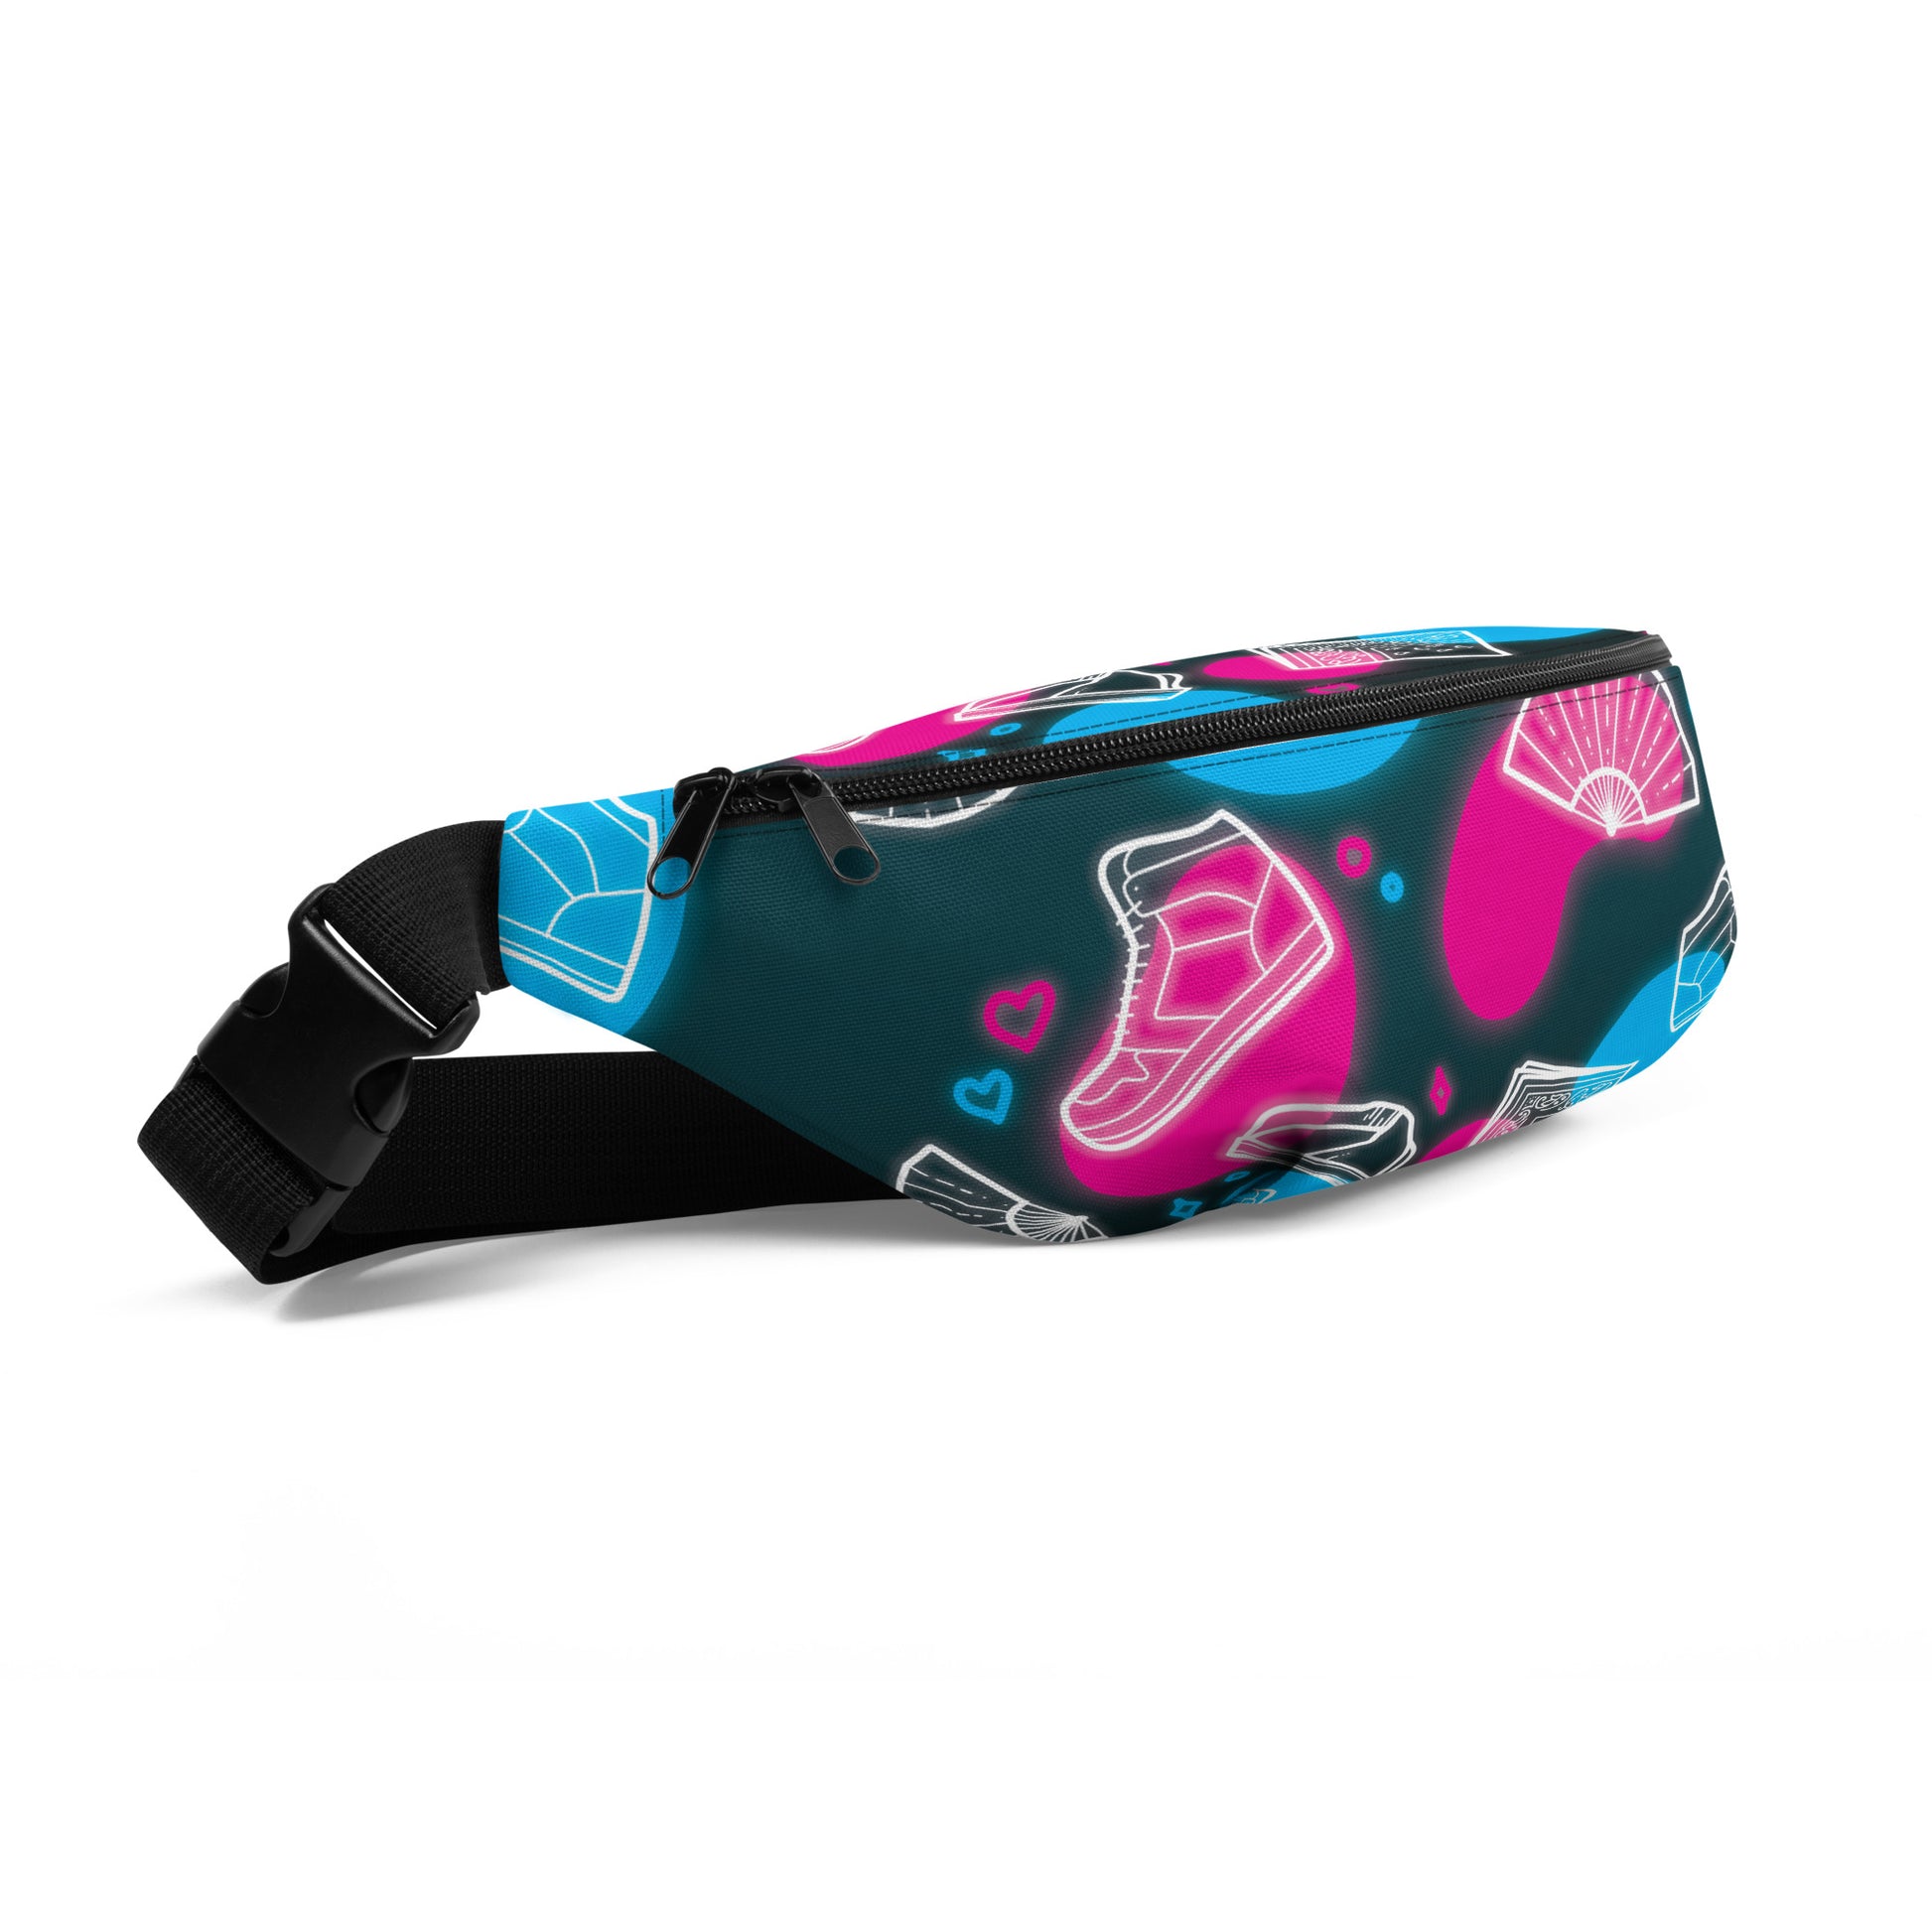 3/4 view of pink and blue fanny pack featuring images of high top shoes fans and bandanas